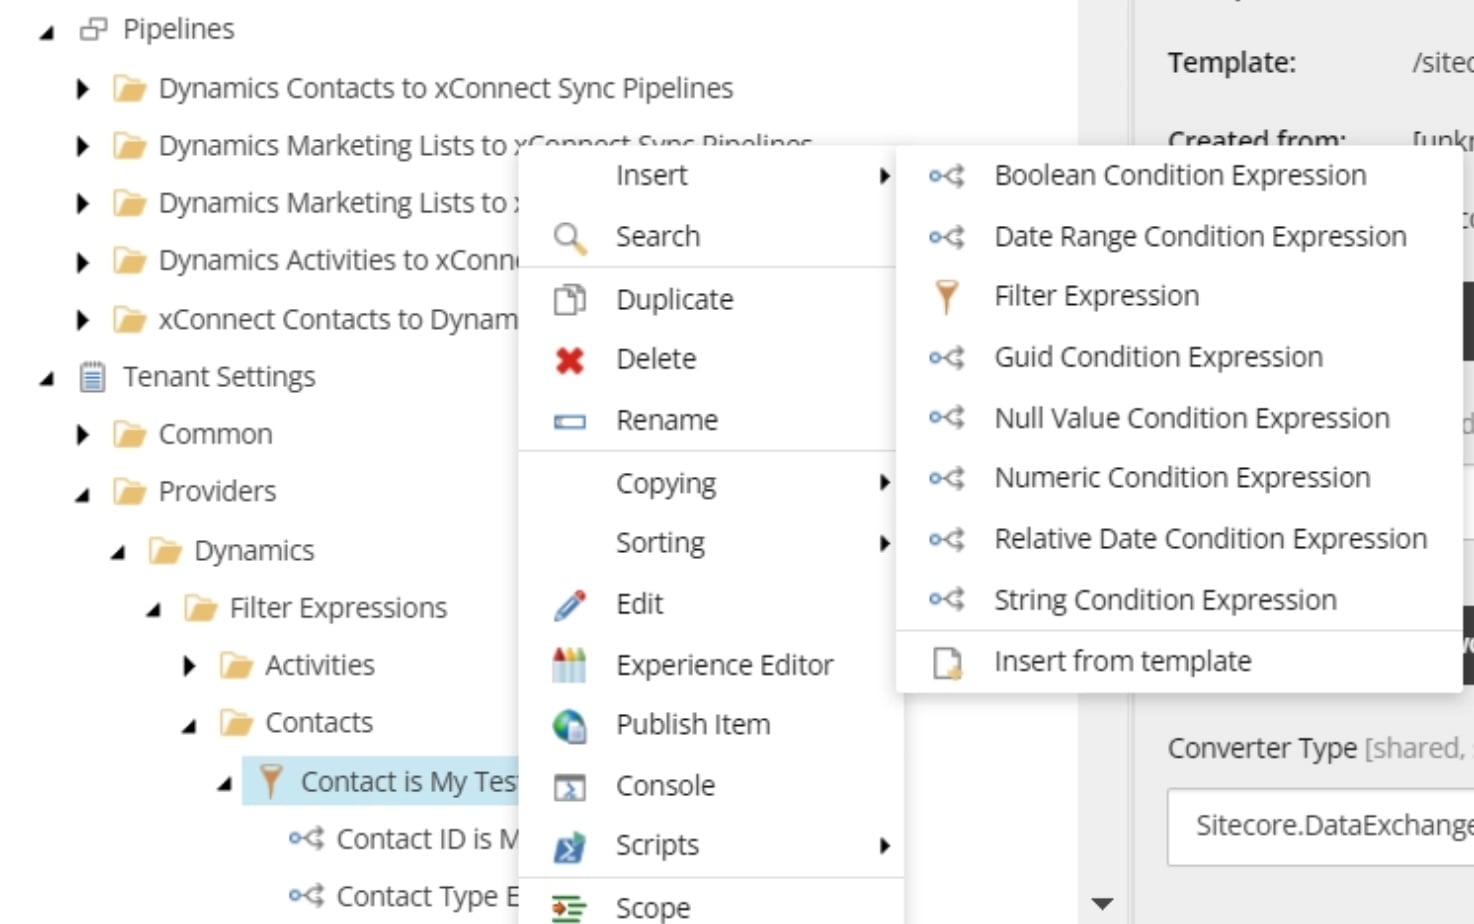 Dynamics Filters for Contacts